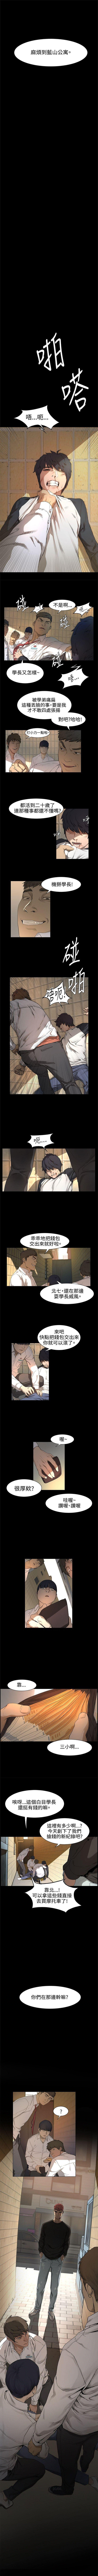 Dykes 衝突 1-113 官方中文（連載中） Italiano - Page 5